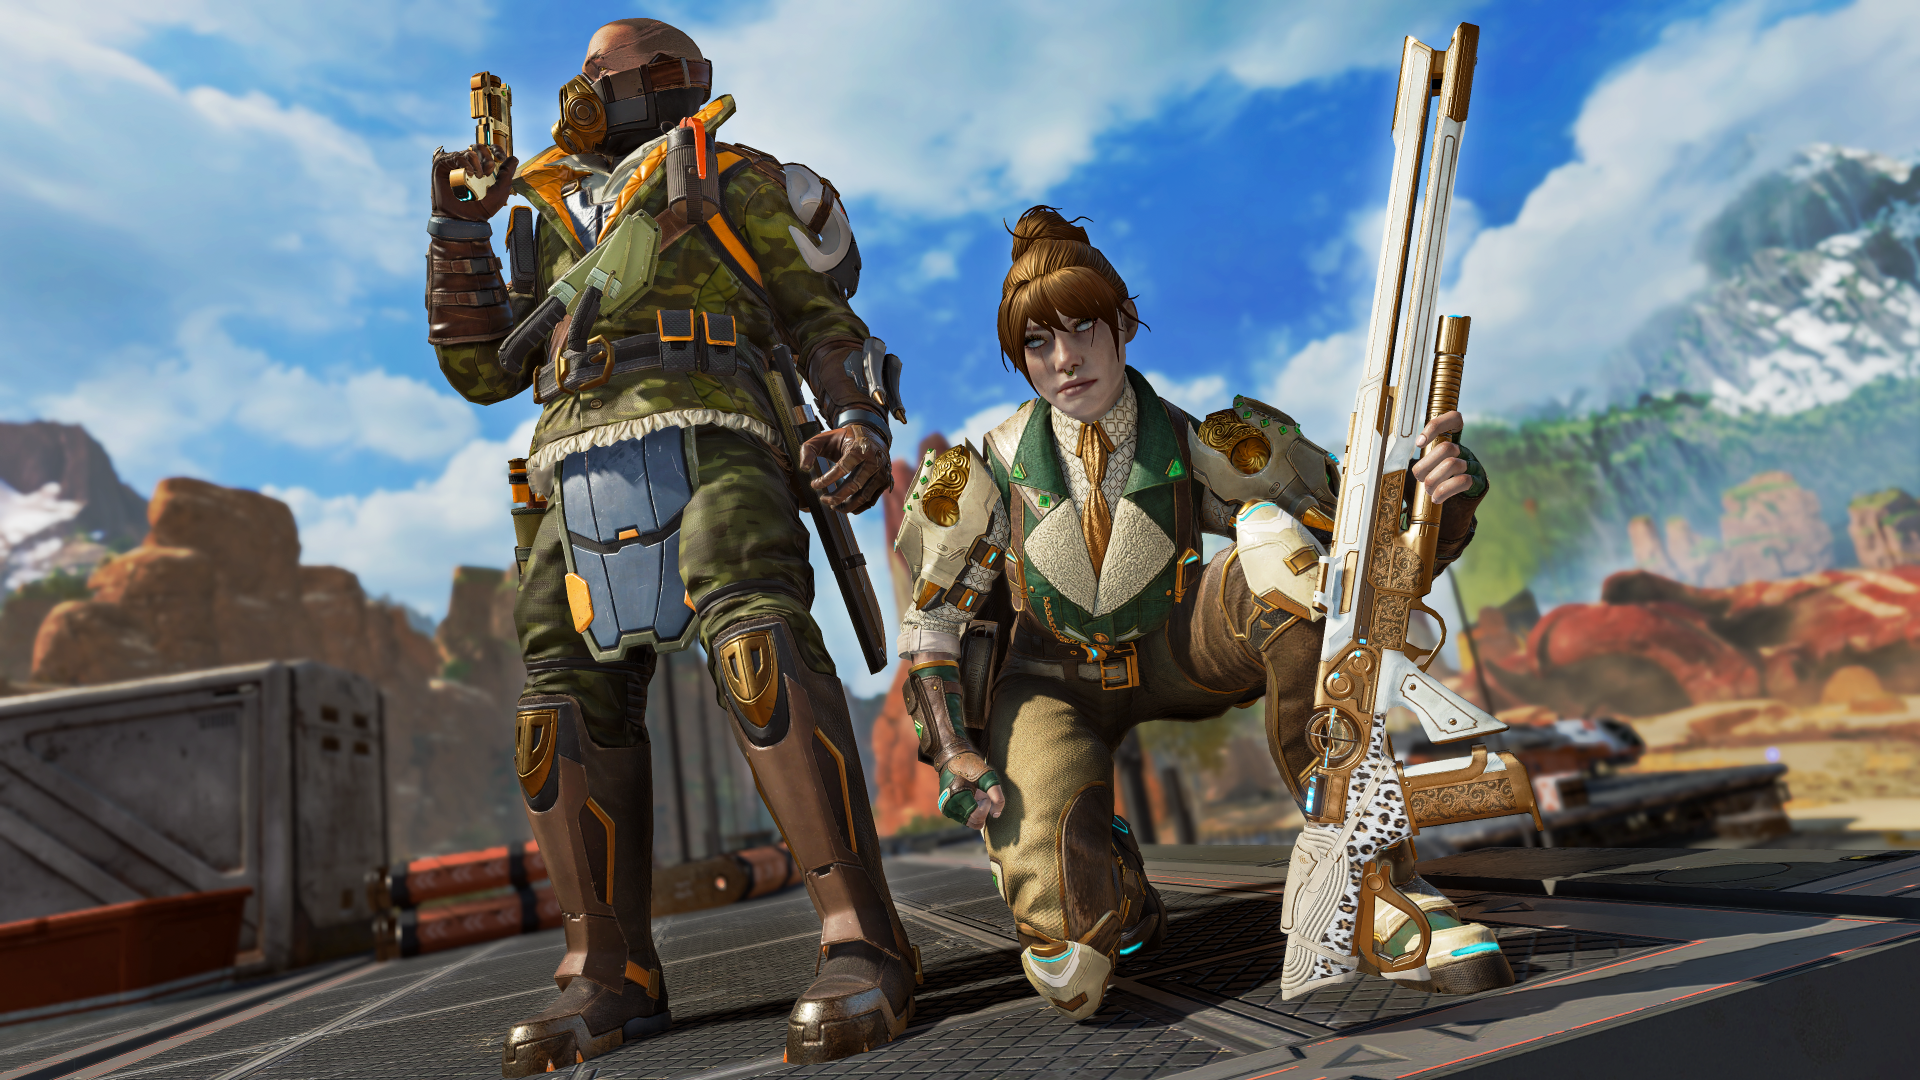 Apex Legends Cross Progression Not Working: How to Enable